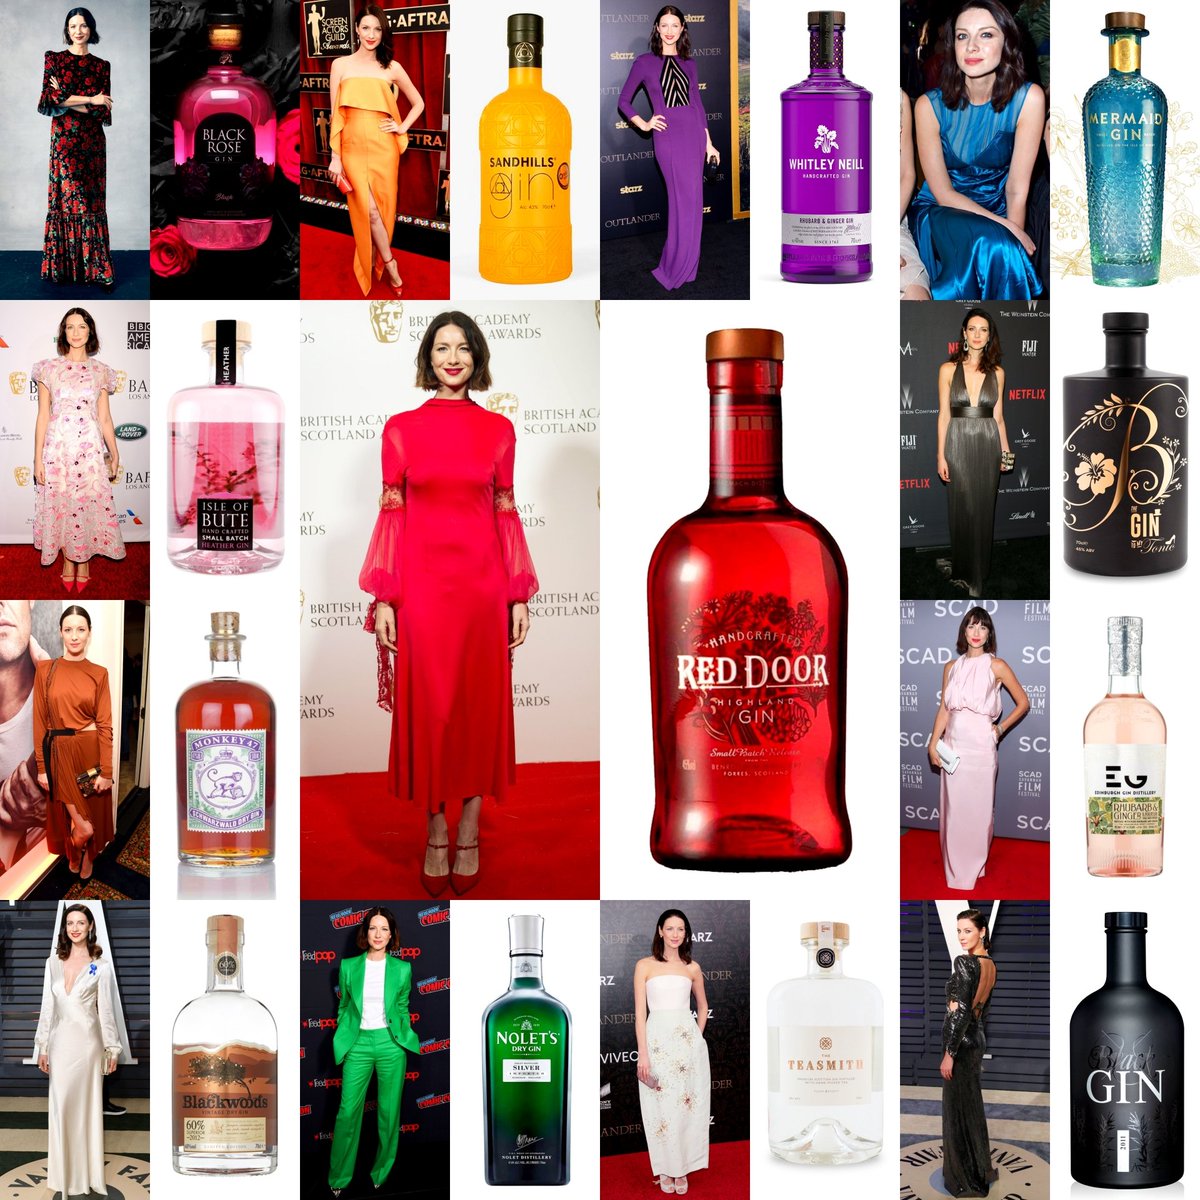 Because we all need alcohol to get through this – and gin happens to me one of my favourites.Get yourself some gin (or some  @caitrionambalfe)! Pick your favourite! Go! CAITRÍONA – THE GIN ~ a thread (I was bored and couldn't sleep)  #Outlander    #CaitrionaBalfe